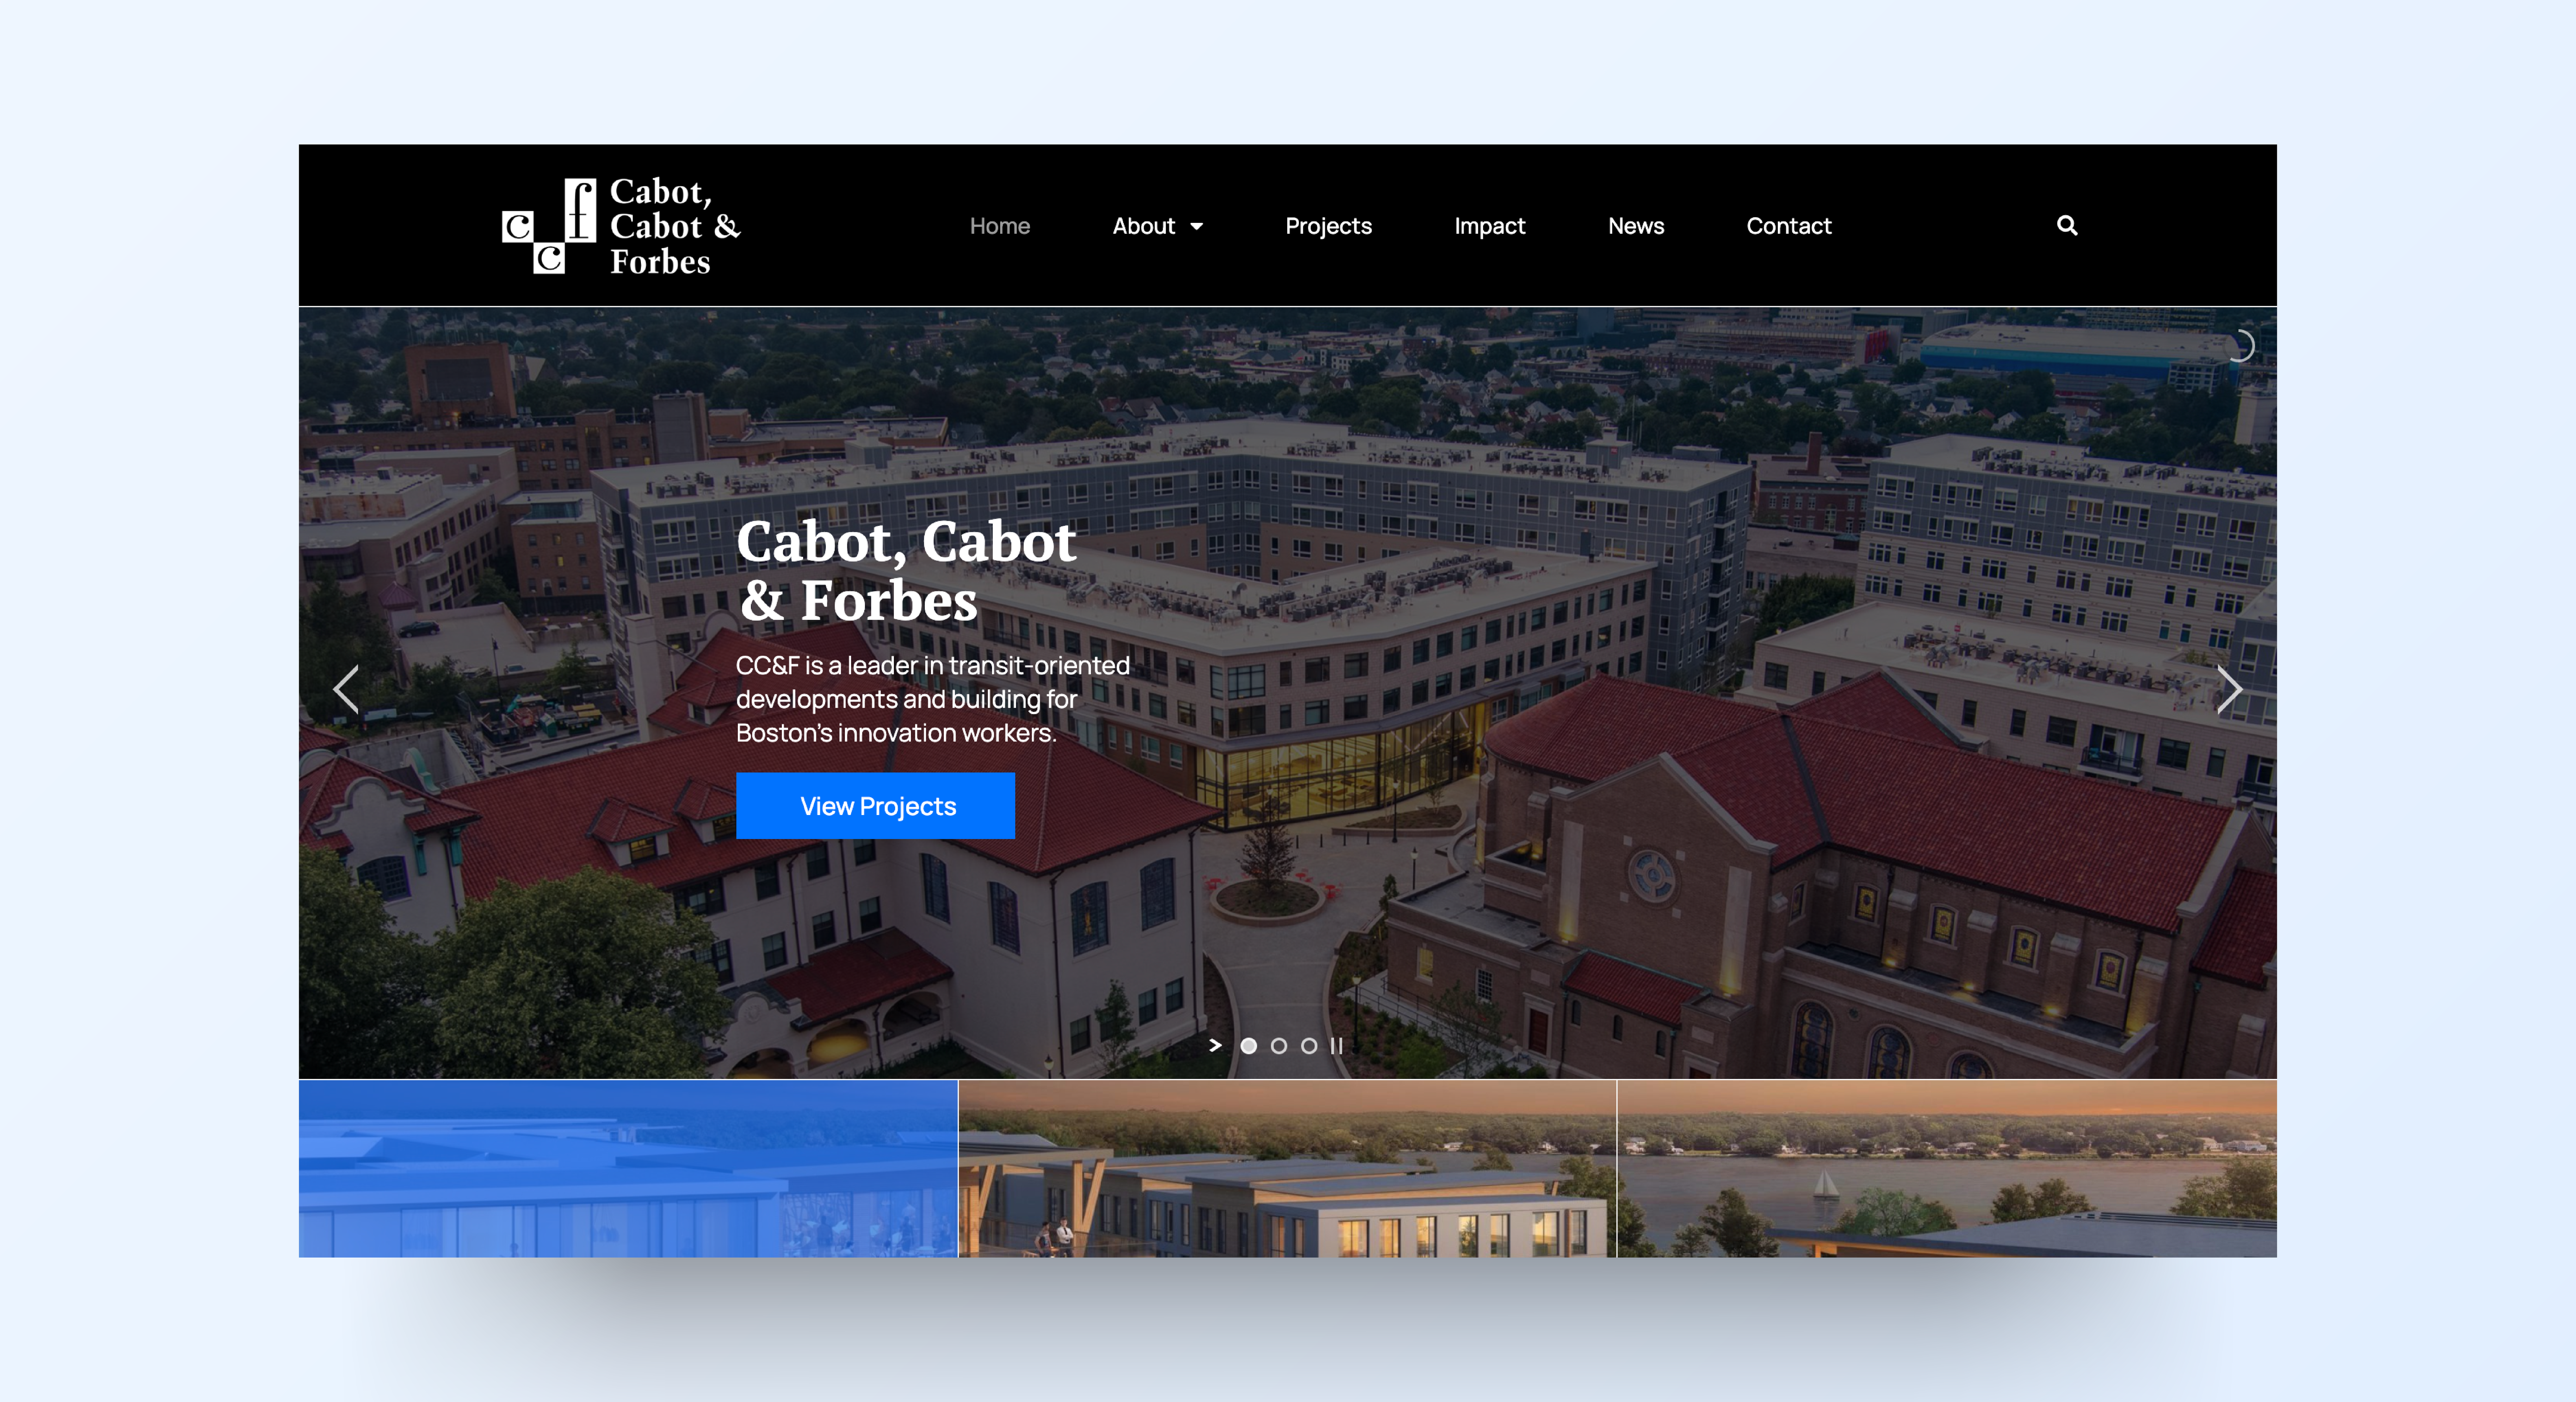 Cabot, Cabot & Forbes Page Design